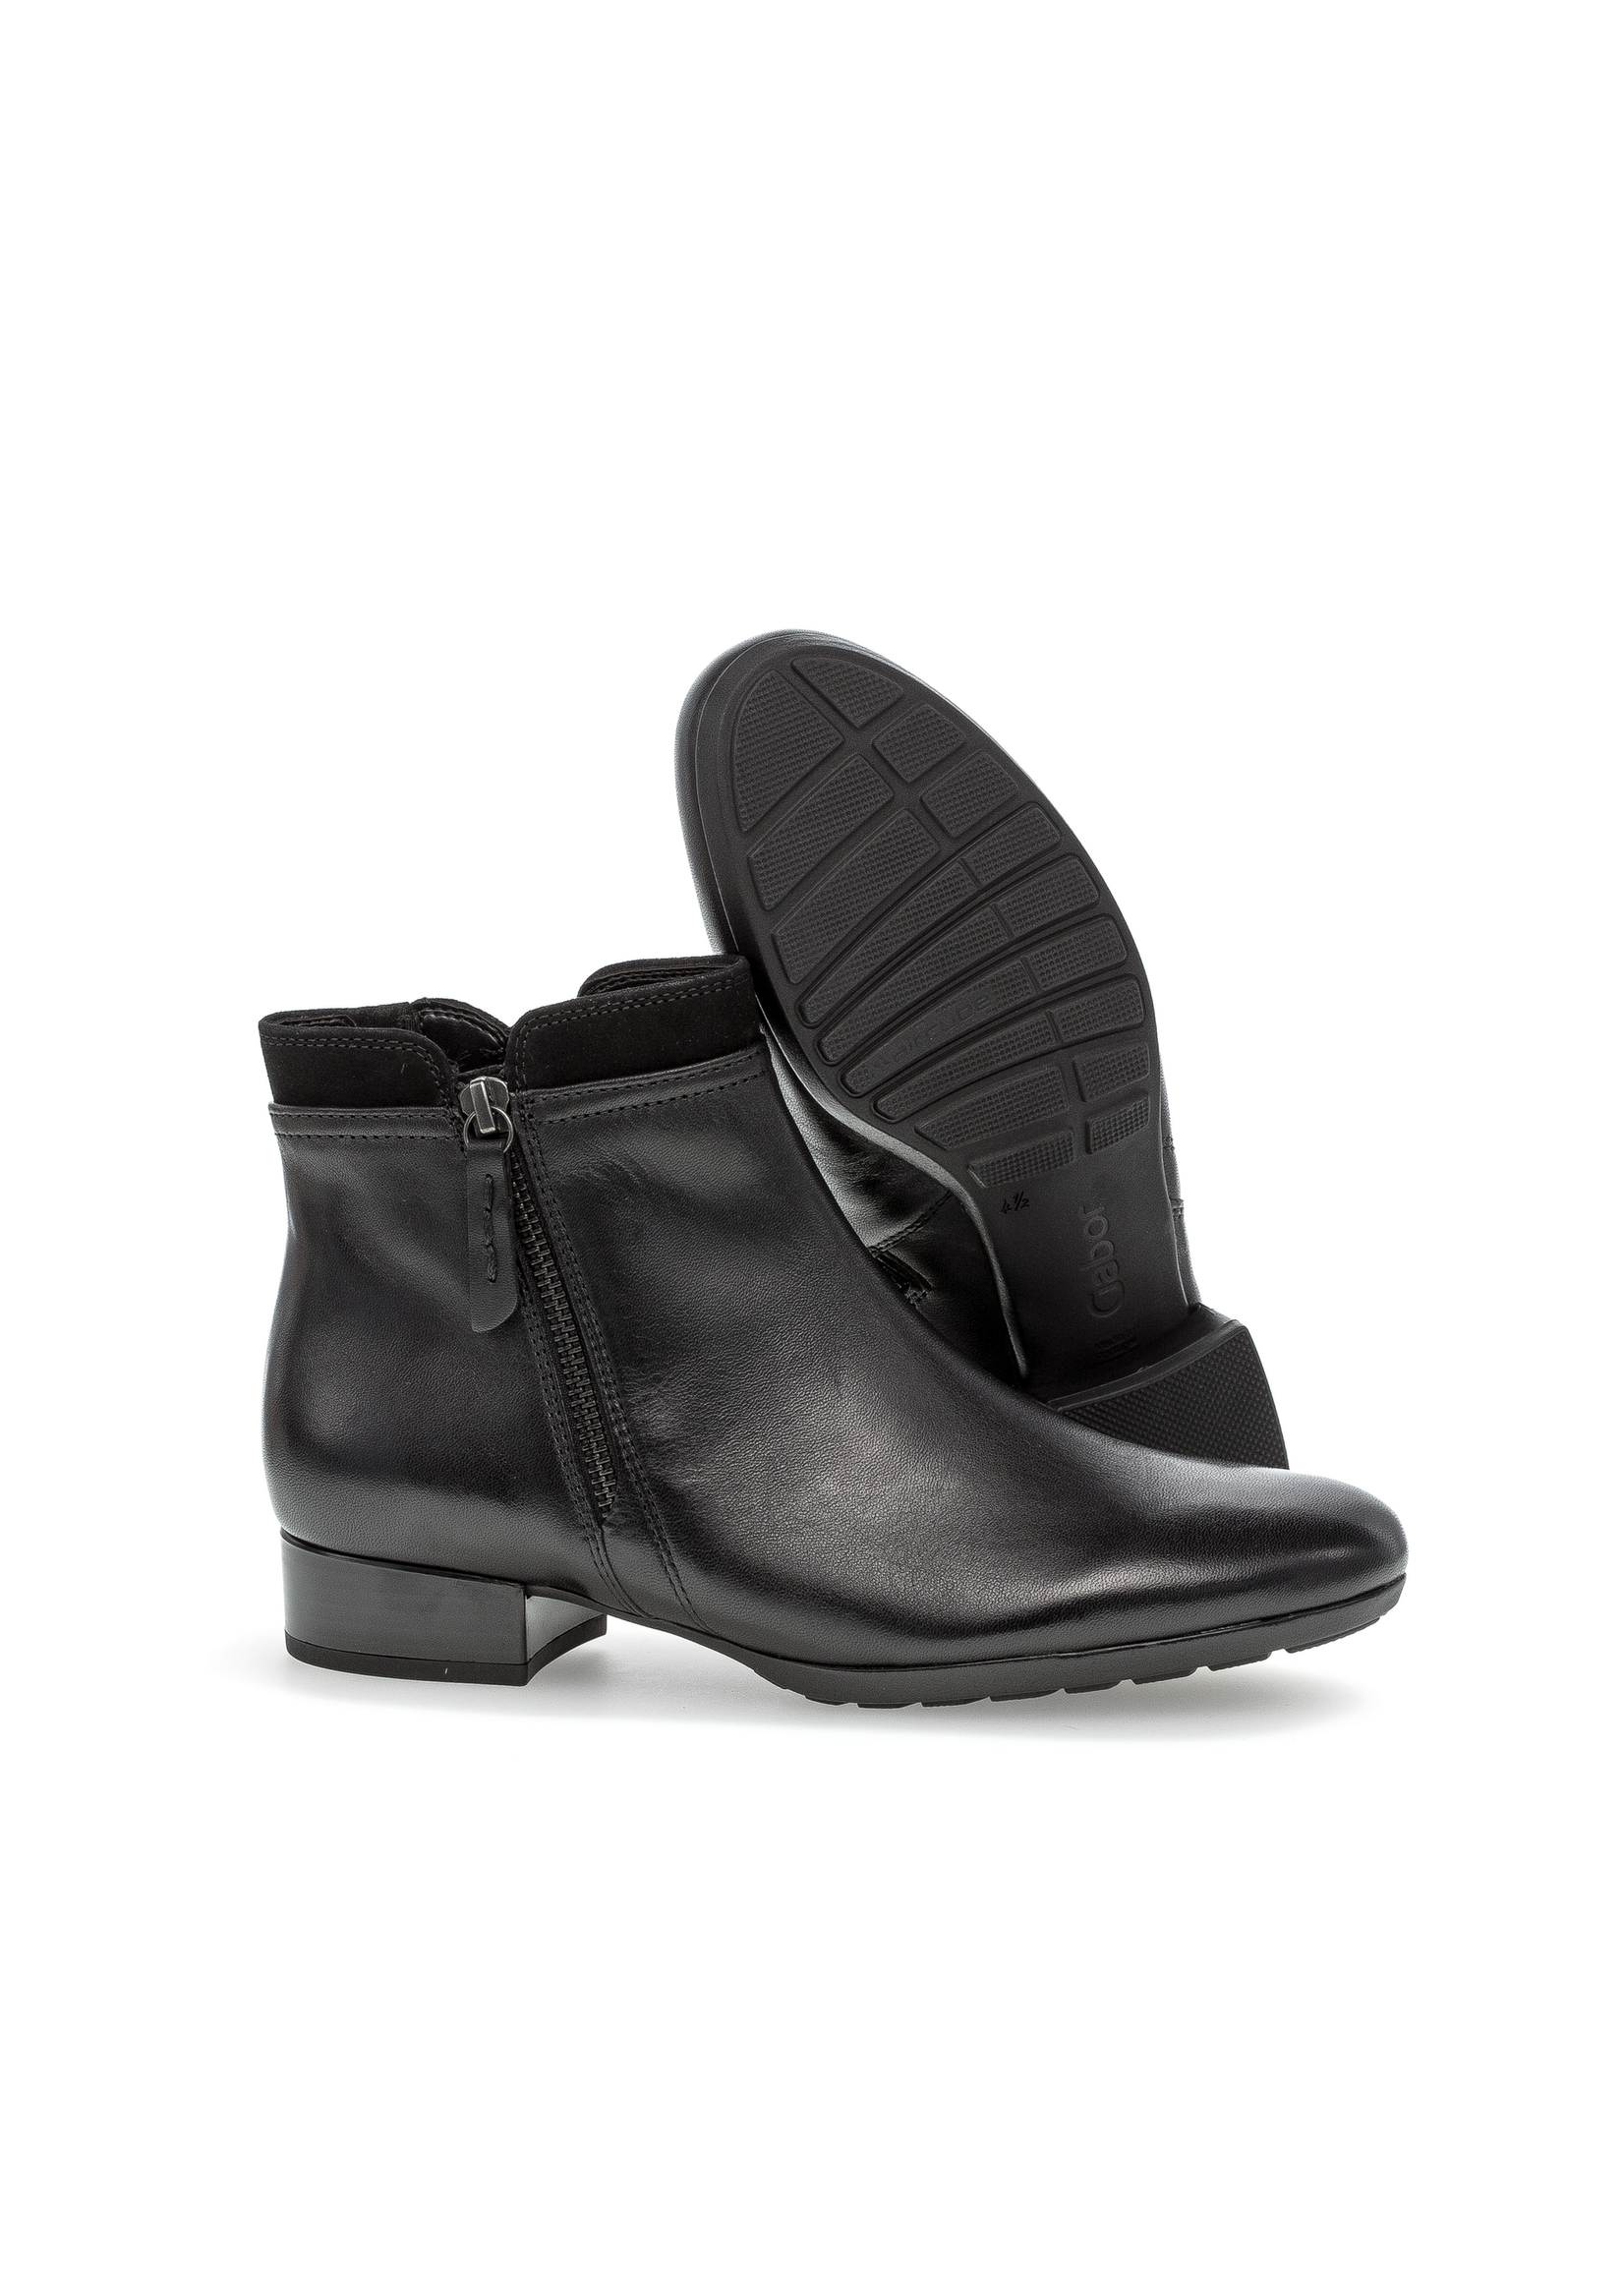 Gabor Black Leather Double Zip Ankle Comfort Boot by Gabor 32.718.57